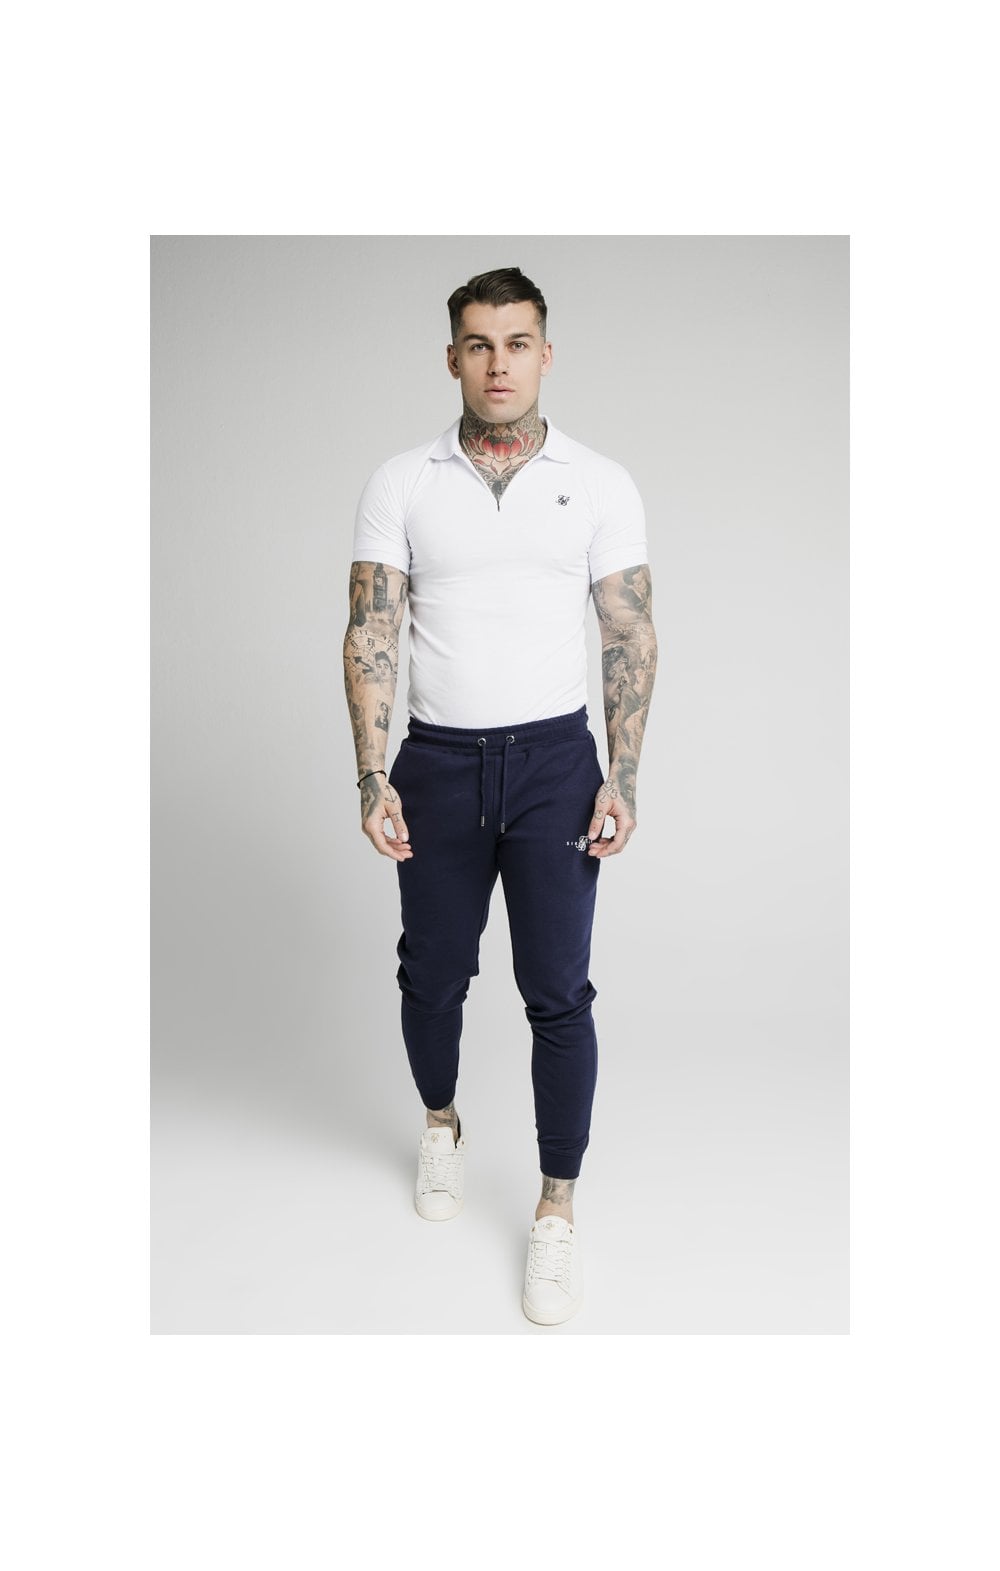 SikSilk Muscle Fit Jogger – Navy (1)